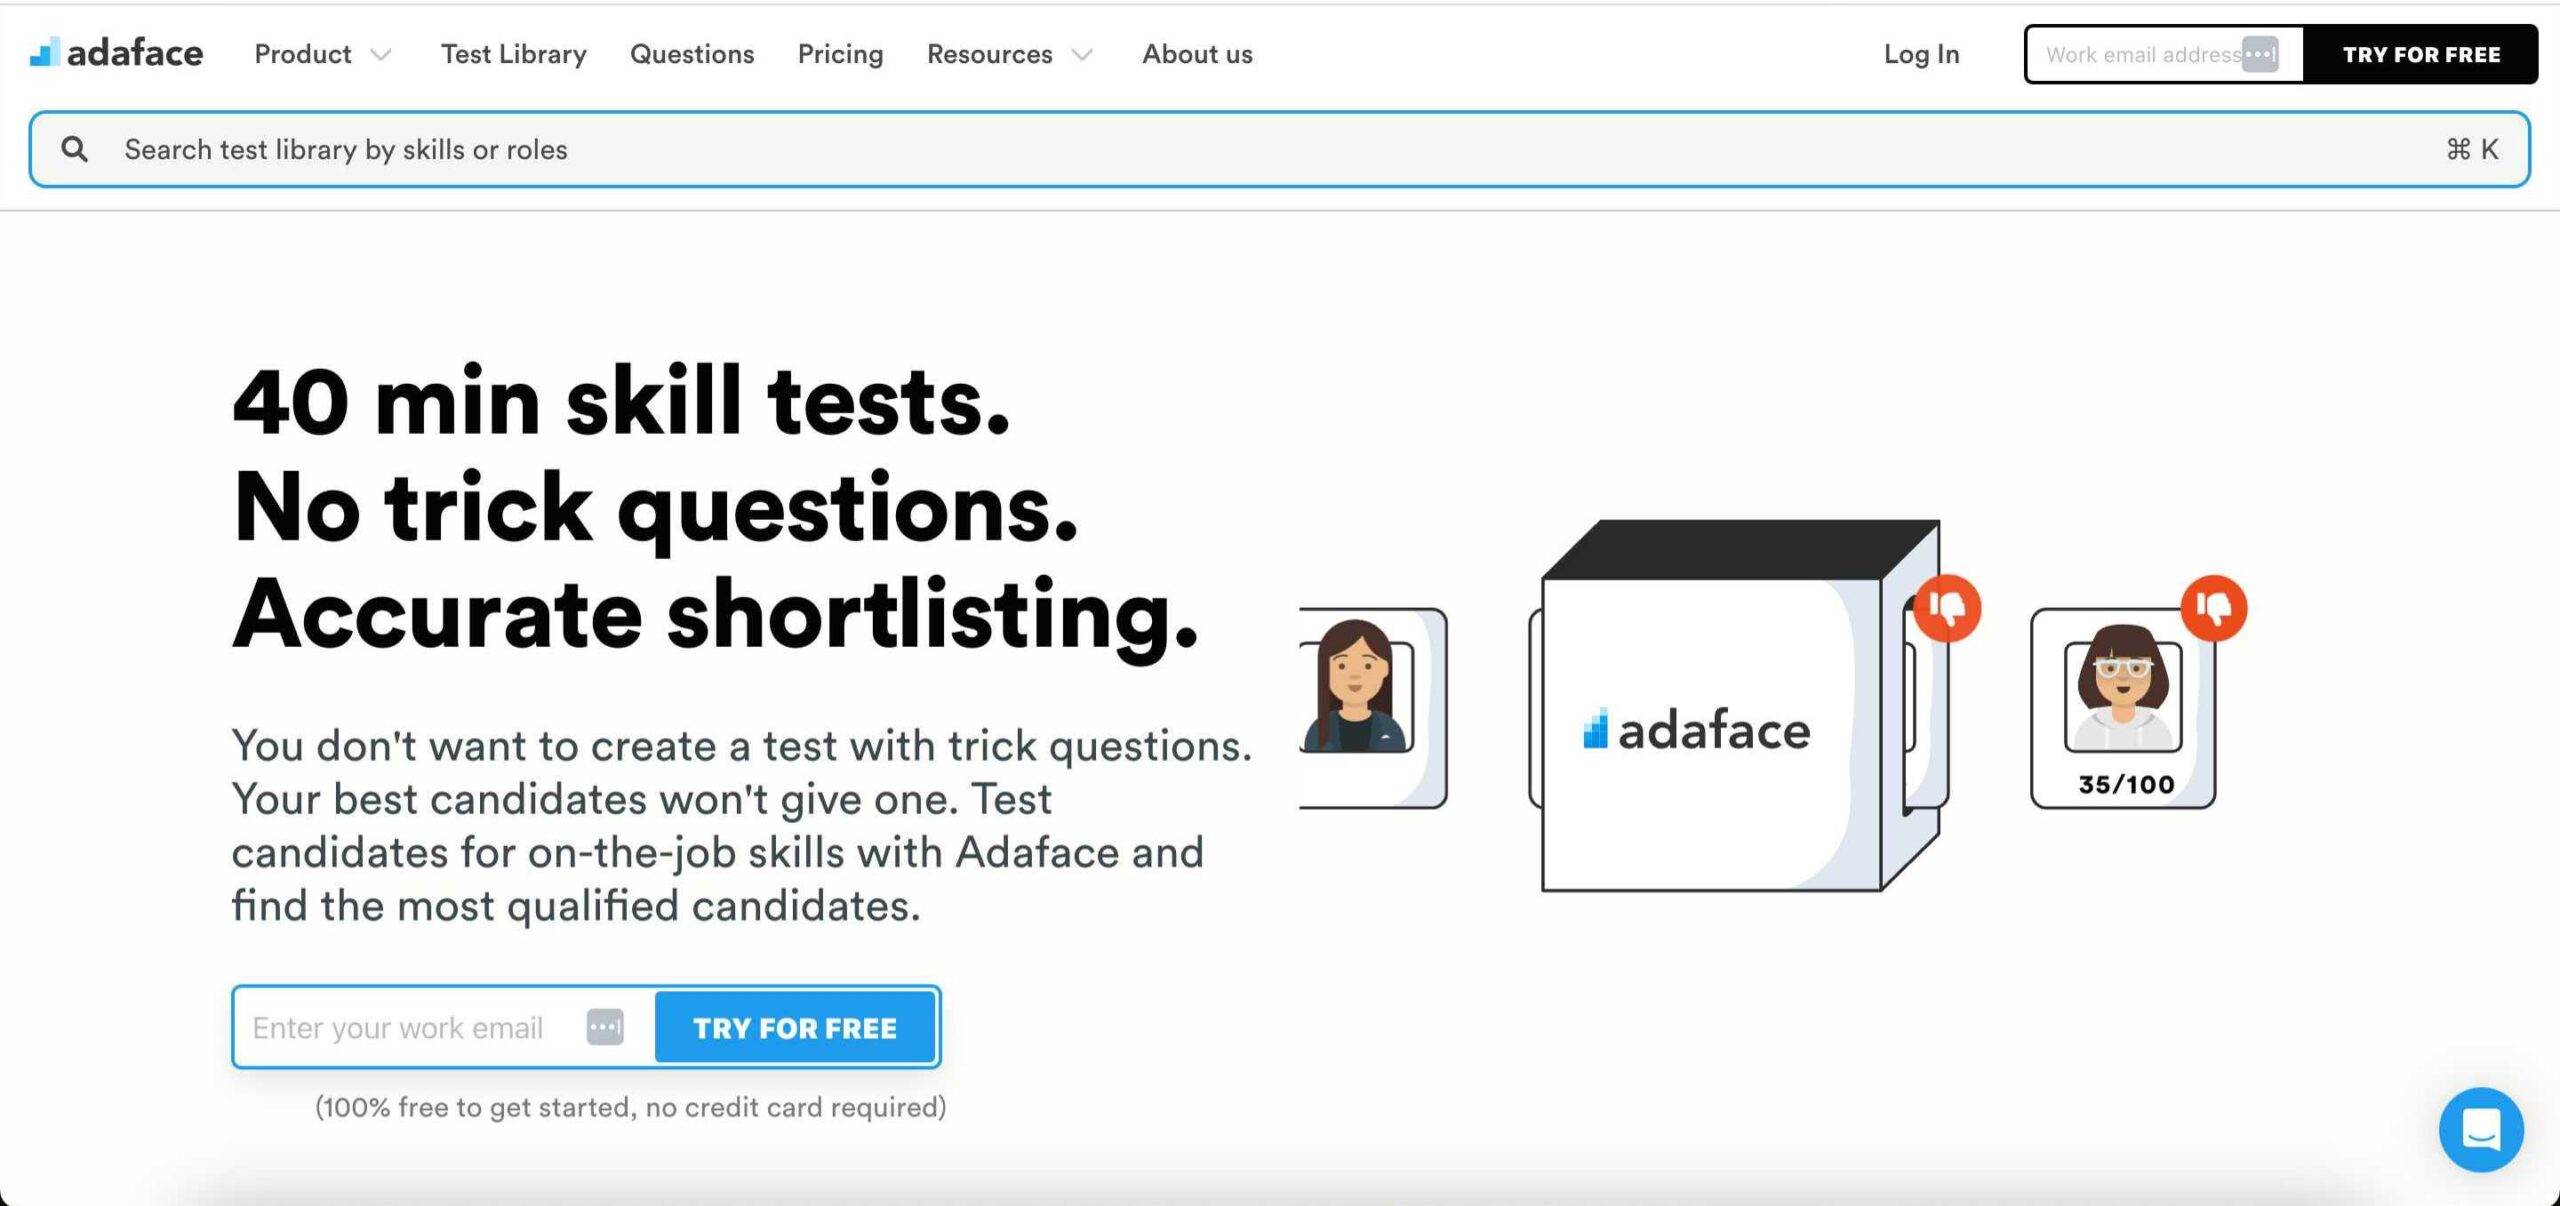 Adaface has a robust skills test library and anti-cheating features.